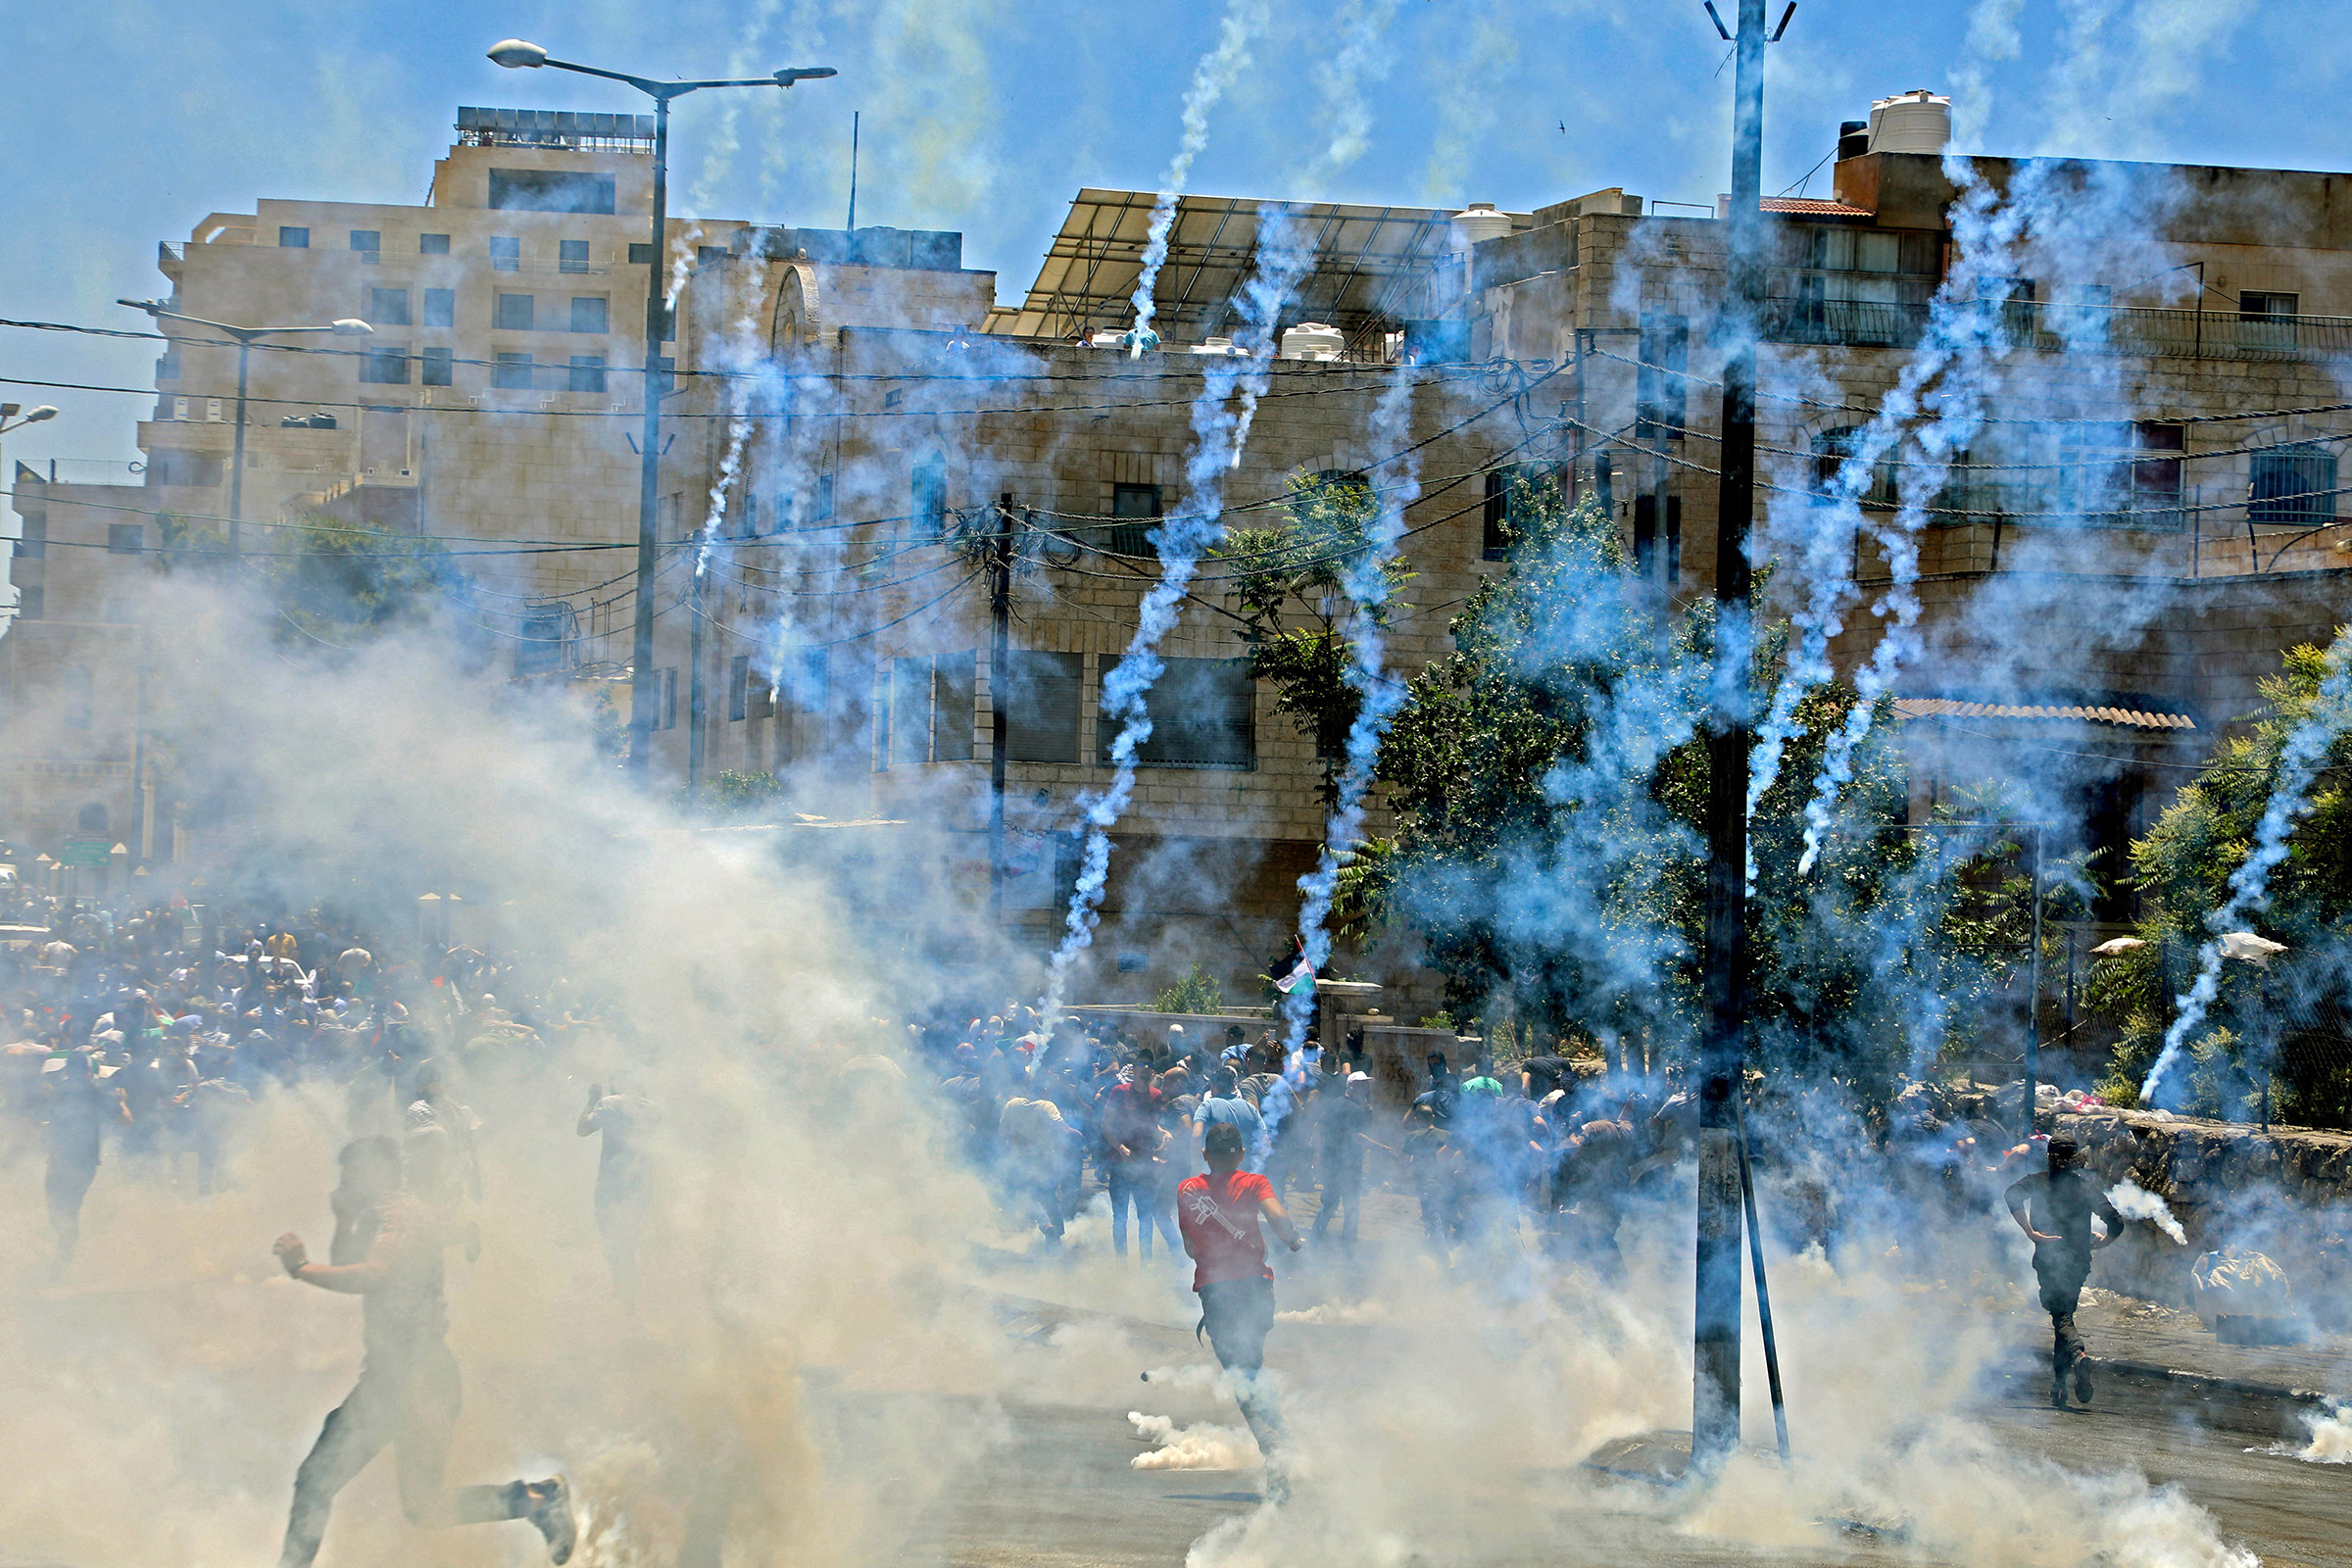 Israeli troops fire tear gas towards demonstrators during a protest against Israeli occupation in the West Bank on May 18. (AFP/Getty Images)